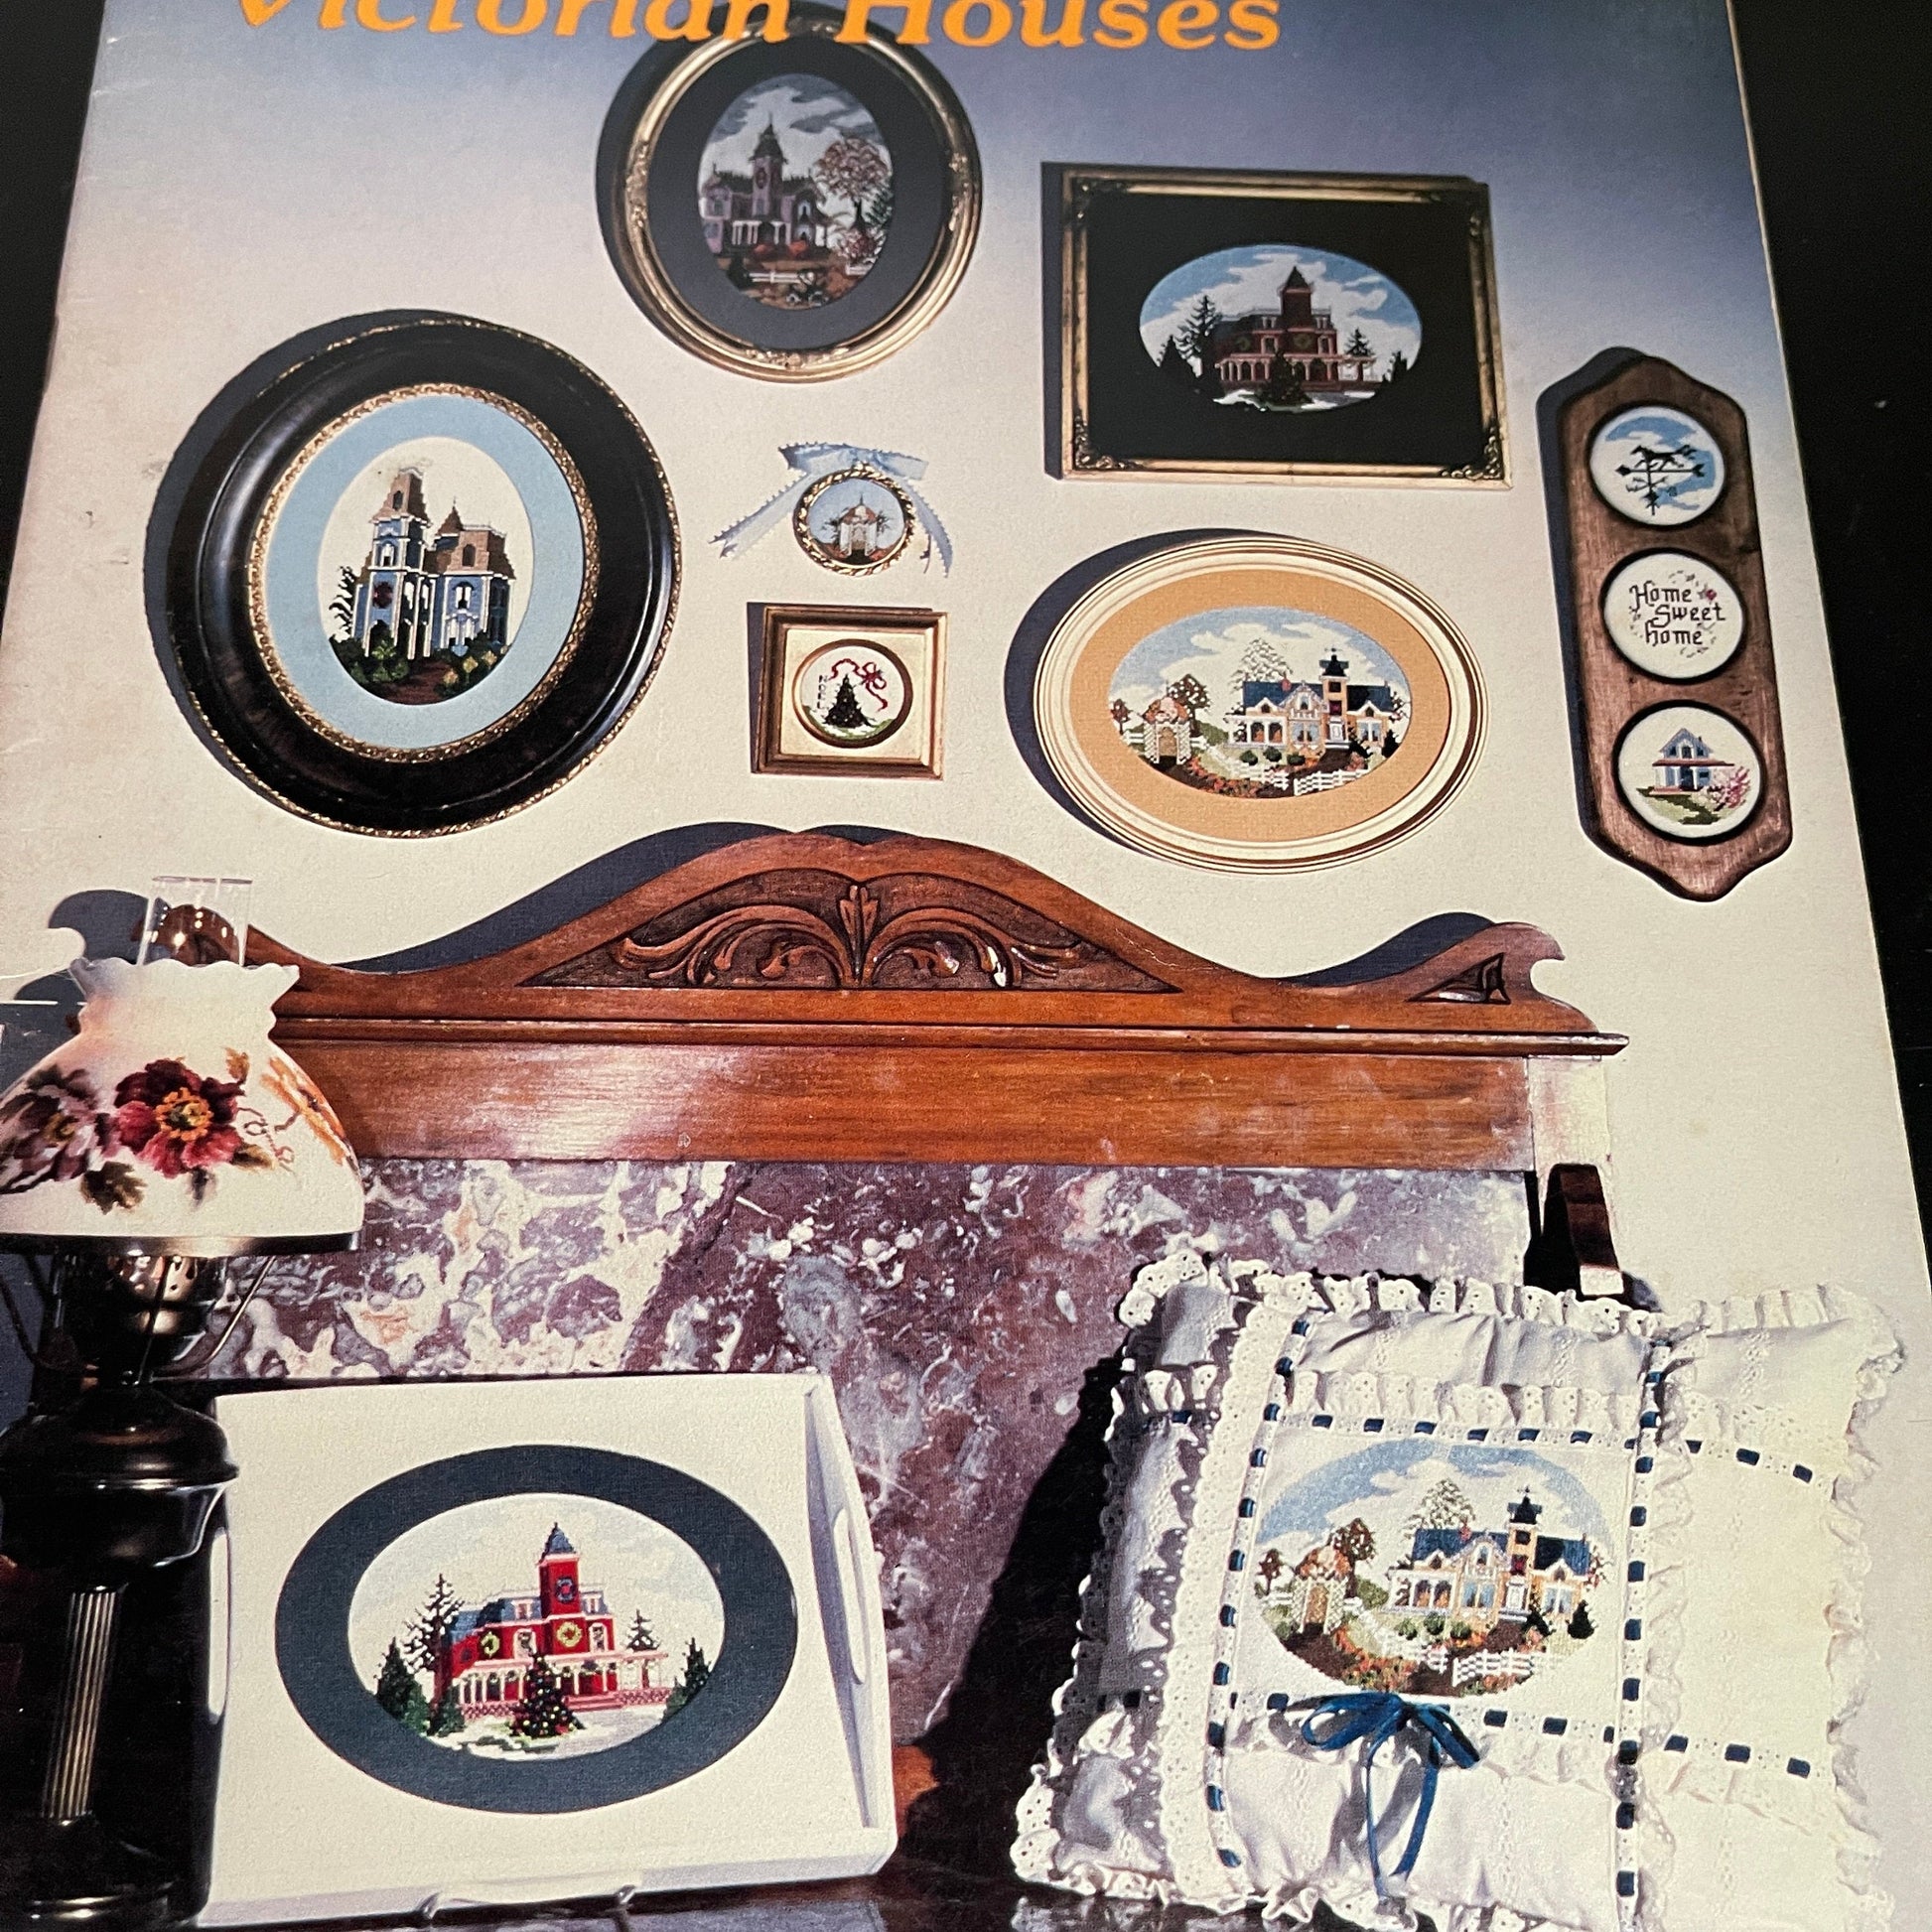 Judith Kirby Victorian Houses vintage 1981 counted cross stitch hard to find out of print chart